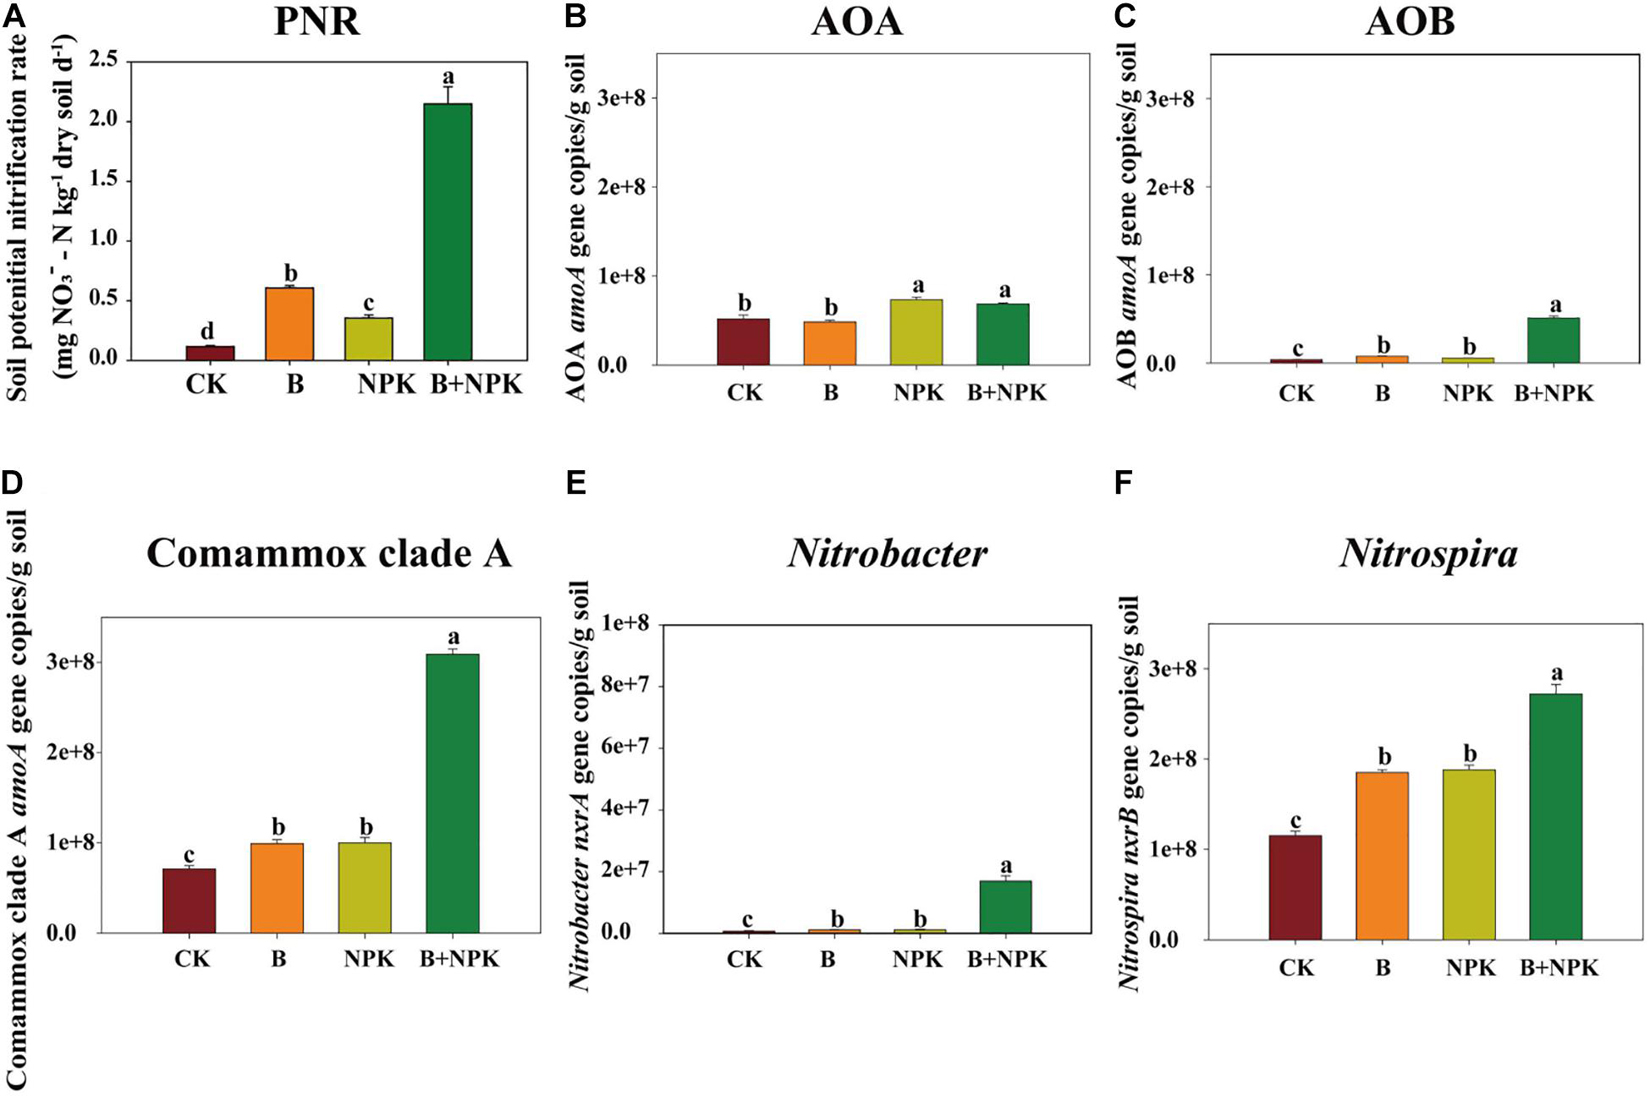 Frontiers Ammonia And Nitrite Oxidizing Bacteria Are Dominant In Nitrification Of Maize 0408